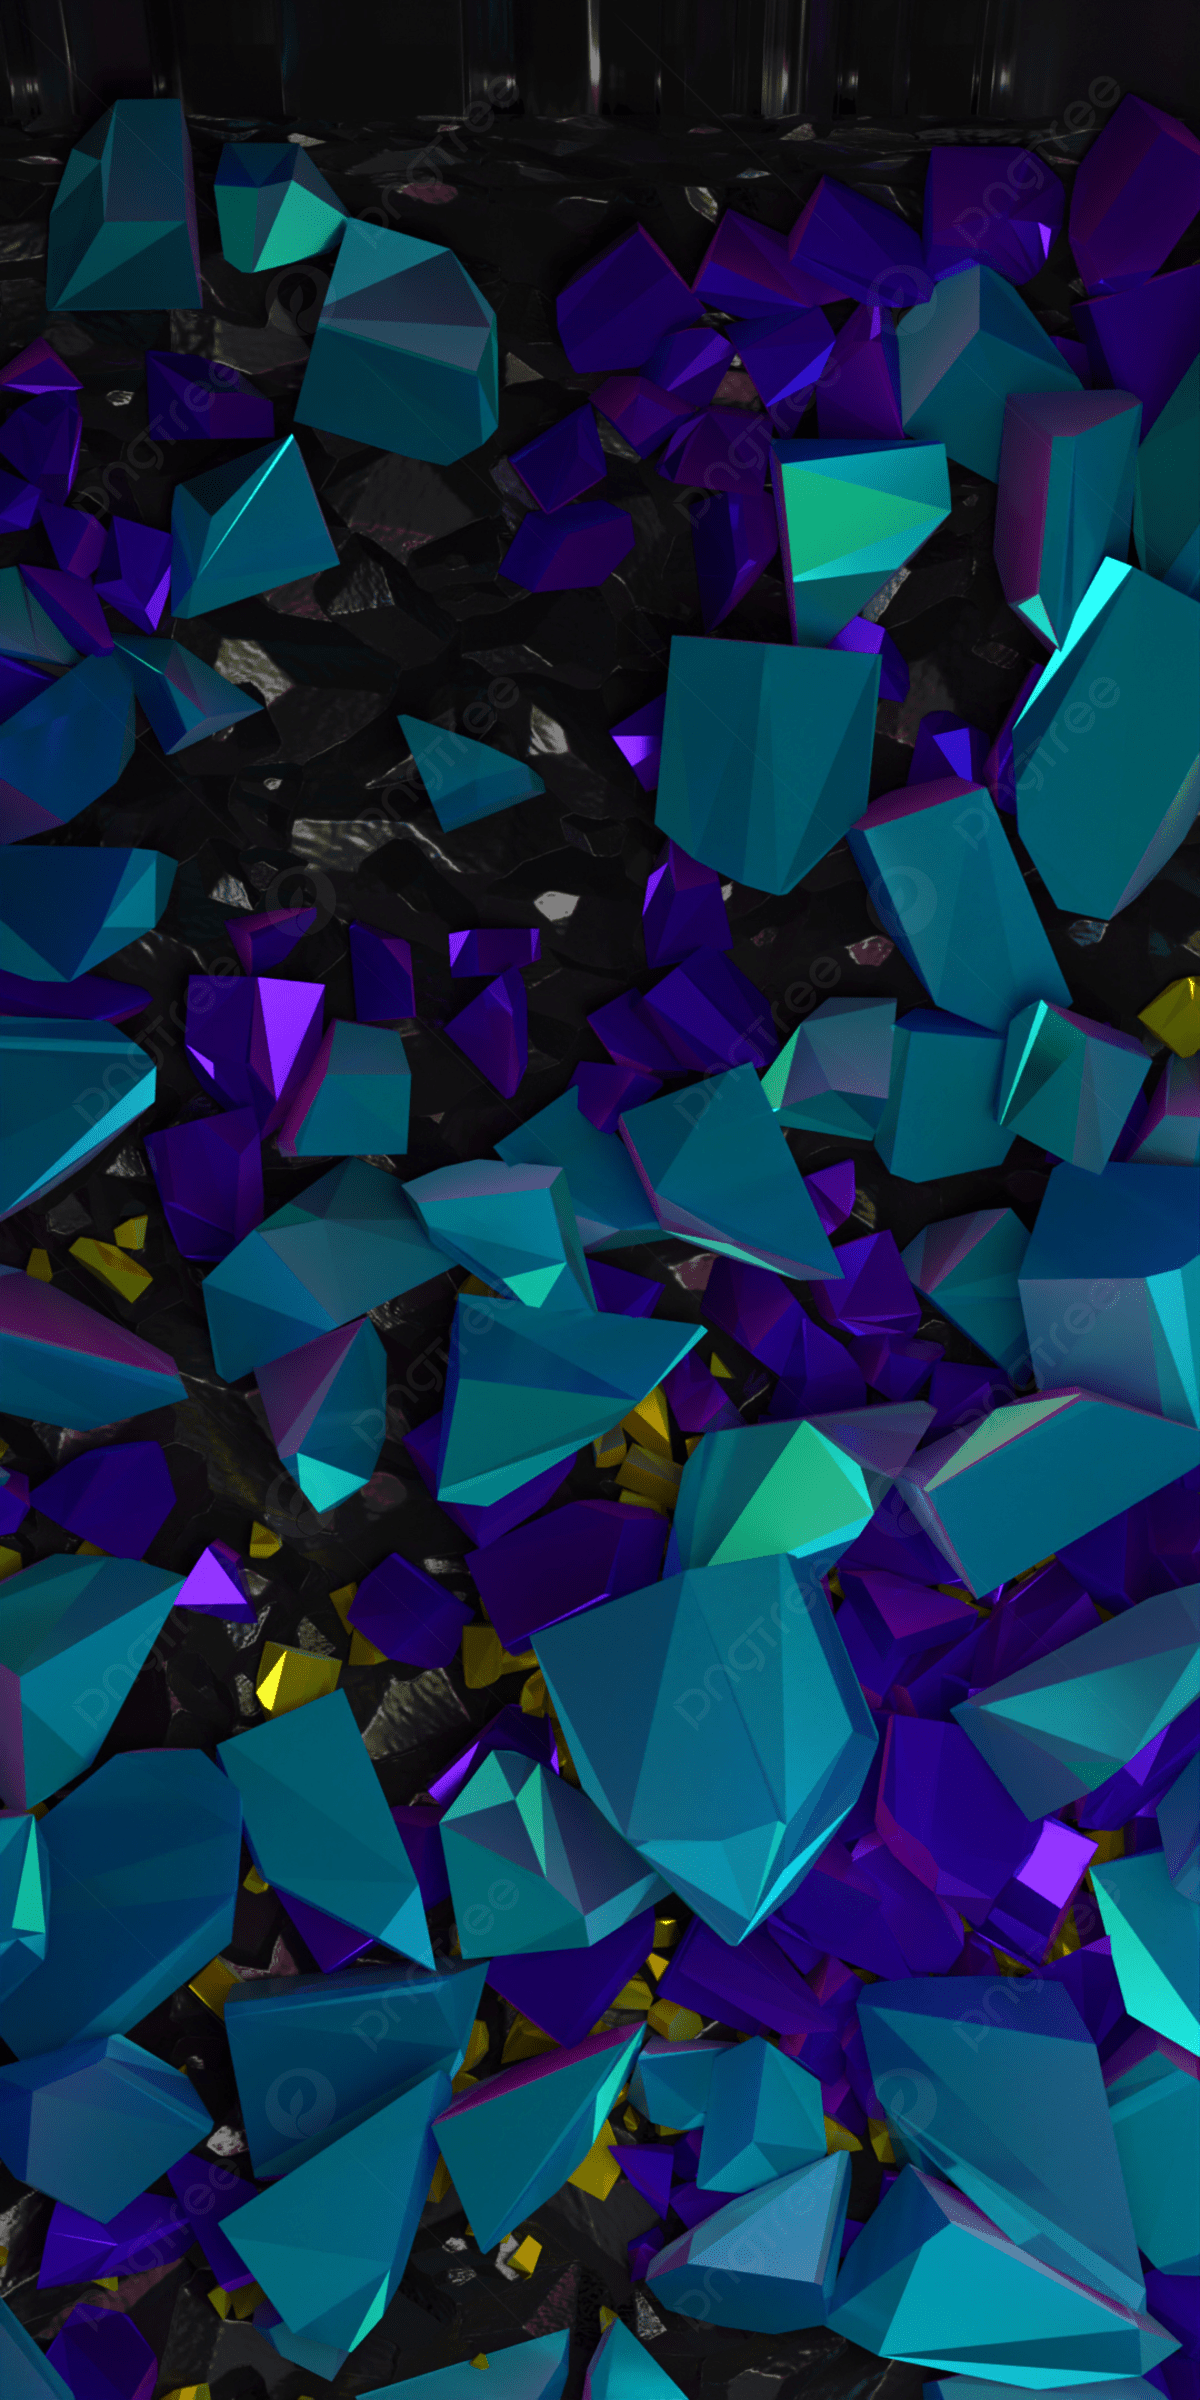 A phone wallpaper of a pile of blue and purple geometric shapes. - Diamond